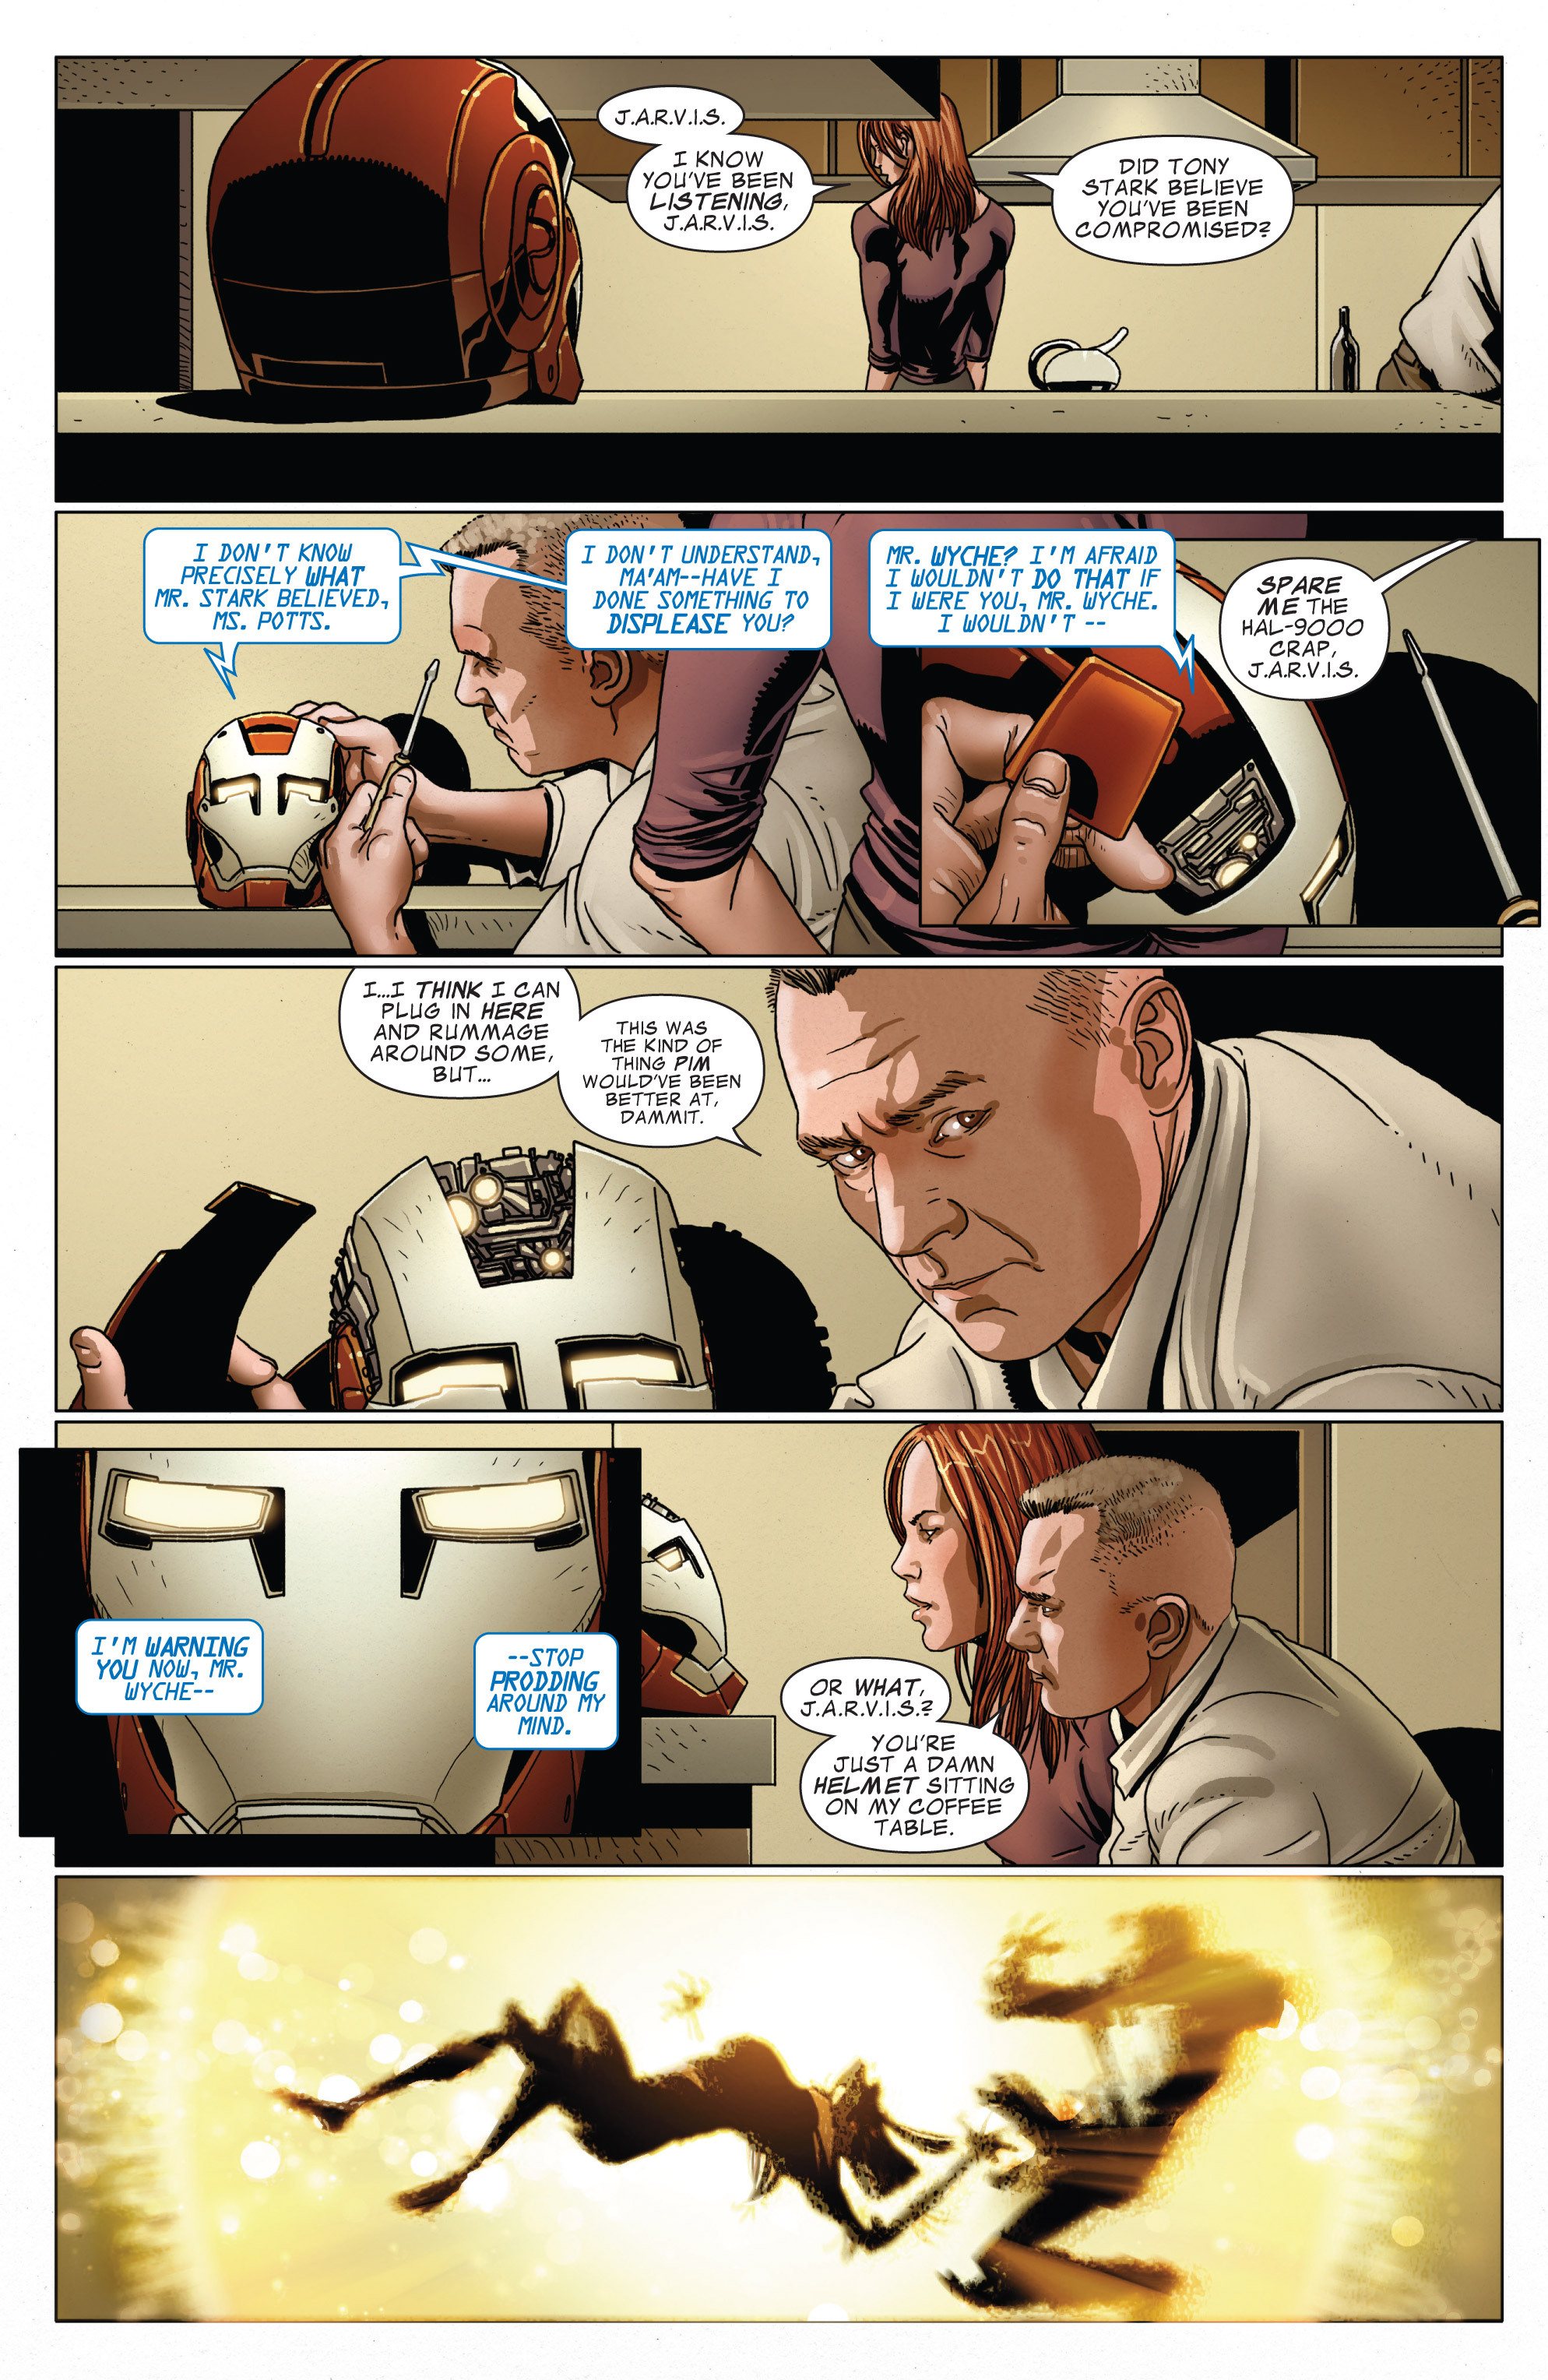 Invincible Iron Man (2008) 523 Page 18